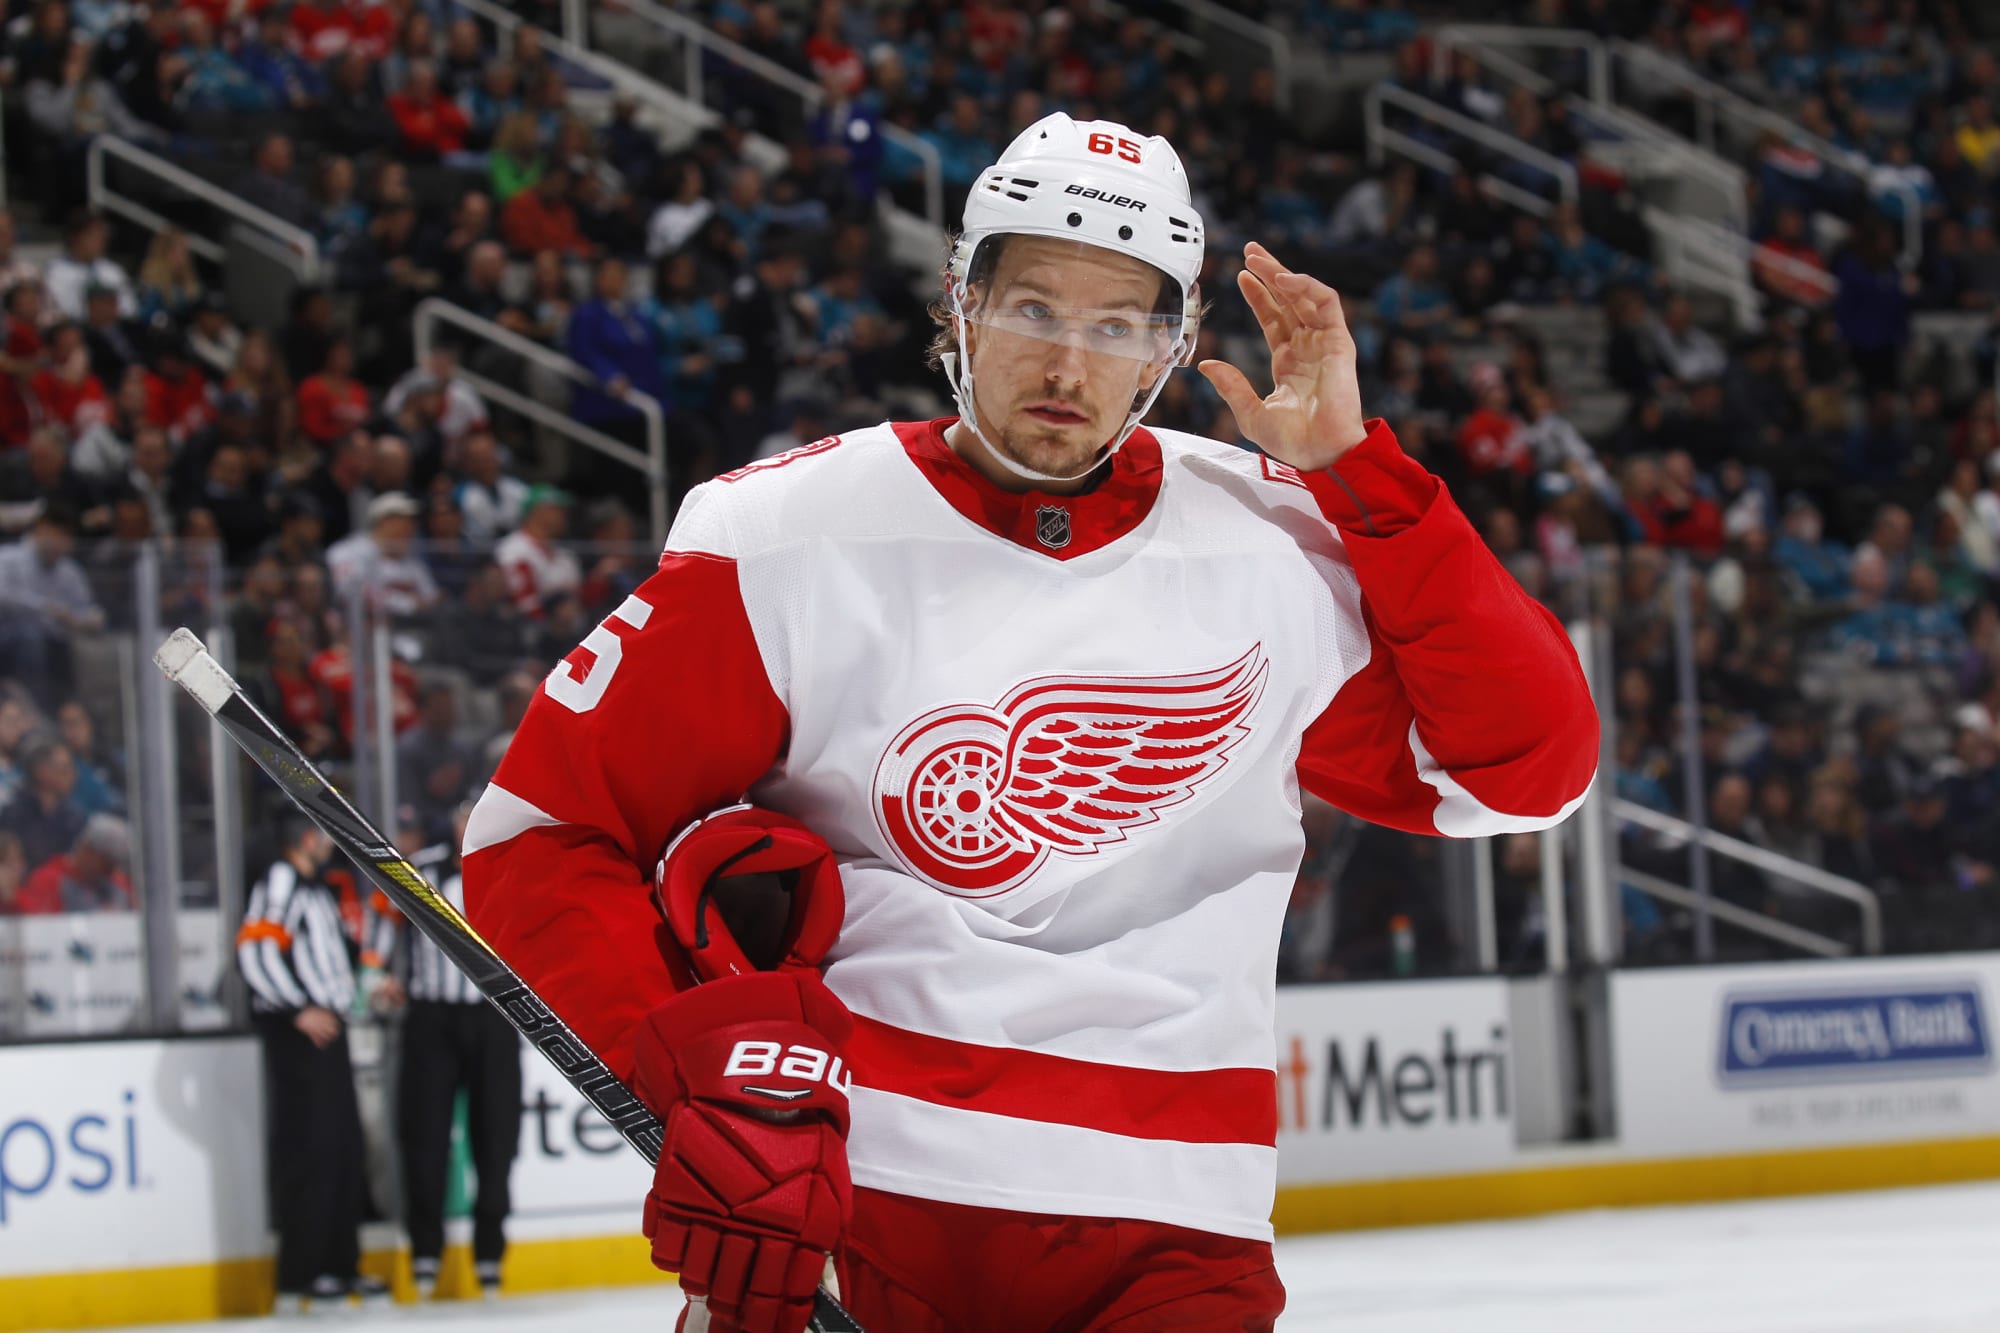 Detroit Red Wings Seider Struggles in Year Two, Potential Still There